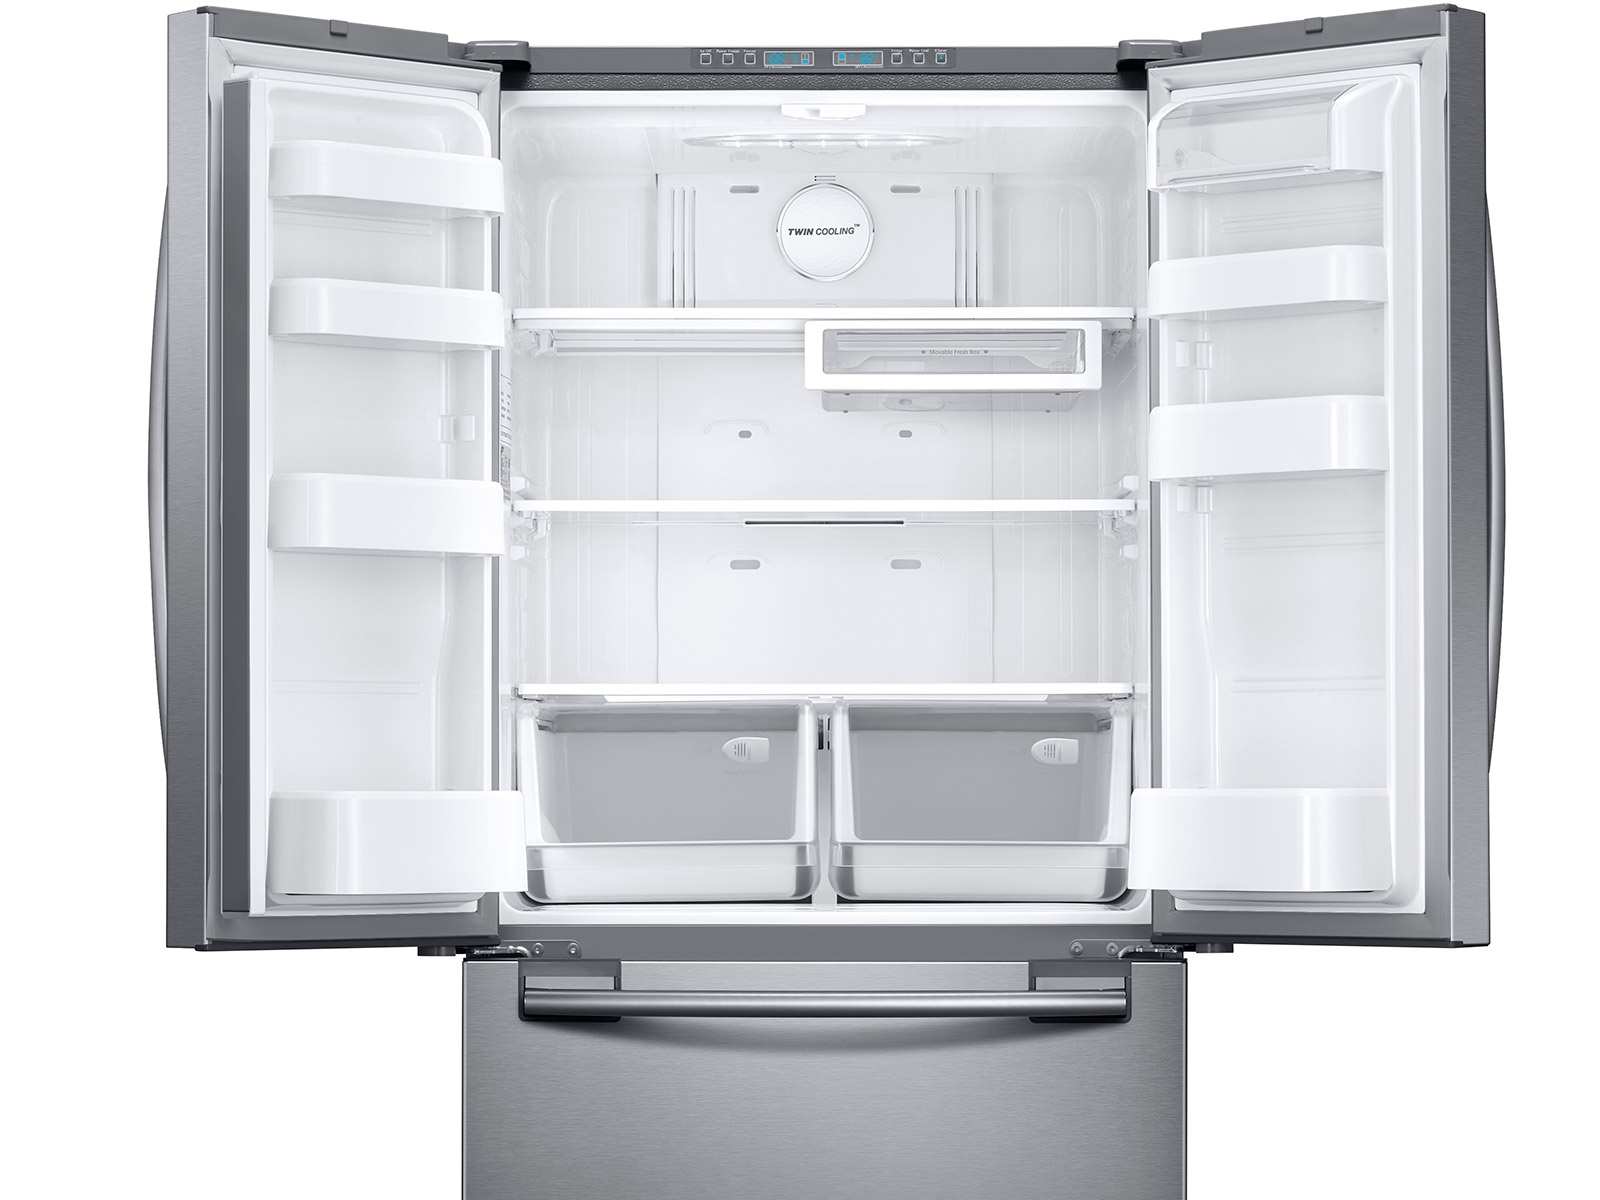 Thumbnail image of 20 cu. ft. French Door Refrigerator in Stainless Steel